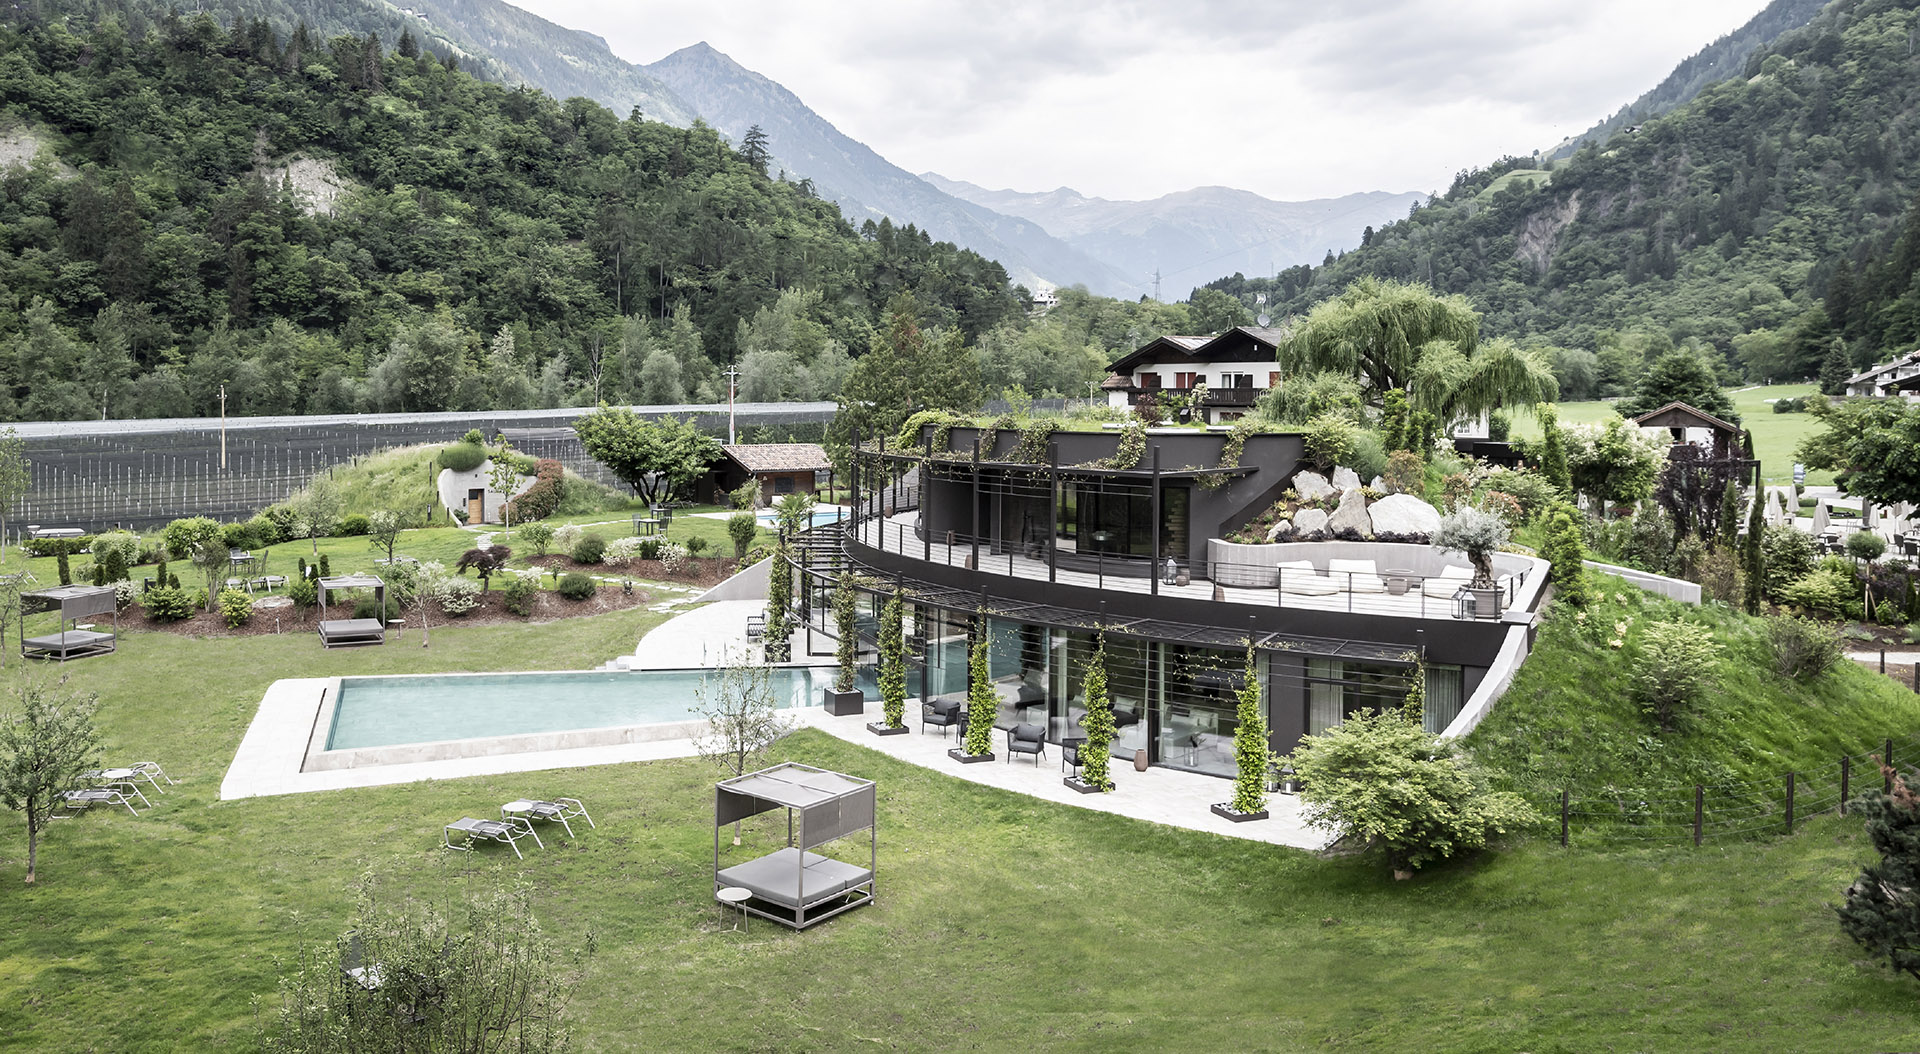 Apfelhotel Torgglerhof: In full bloom. A new generation on its way to transforming a historic place into a space dedicated to indulgence of the senses